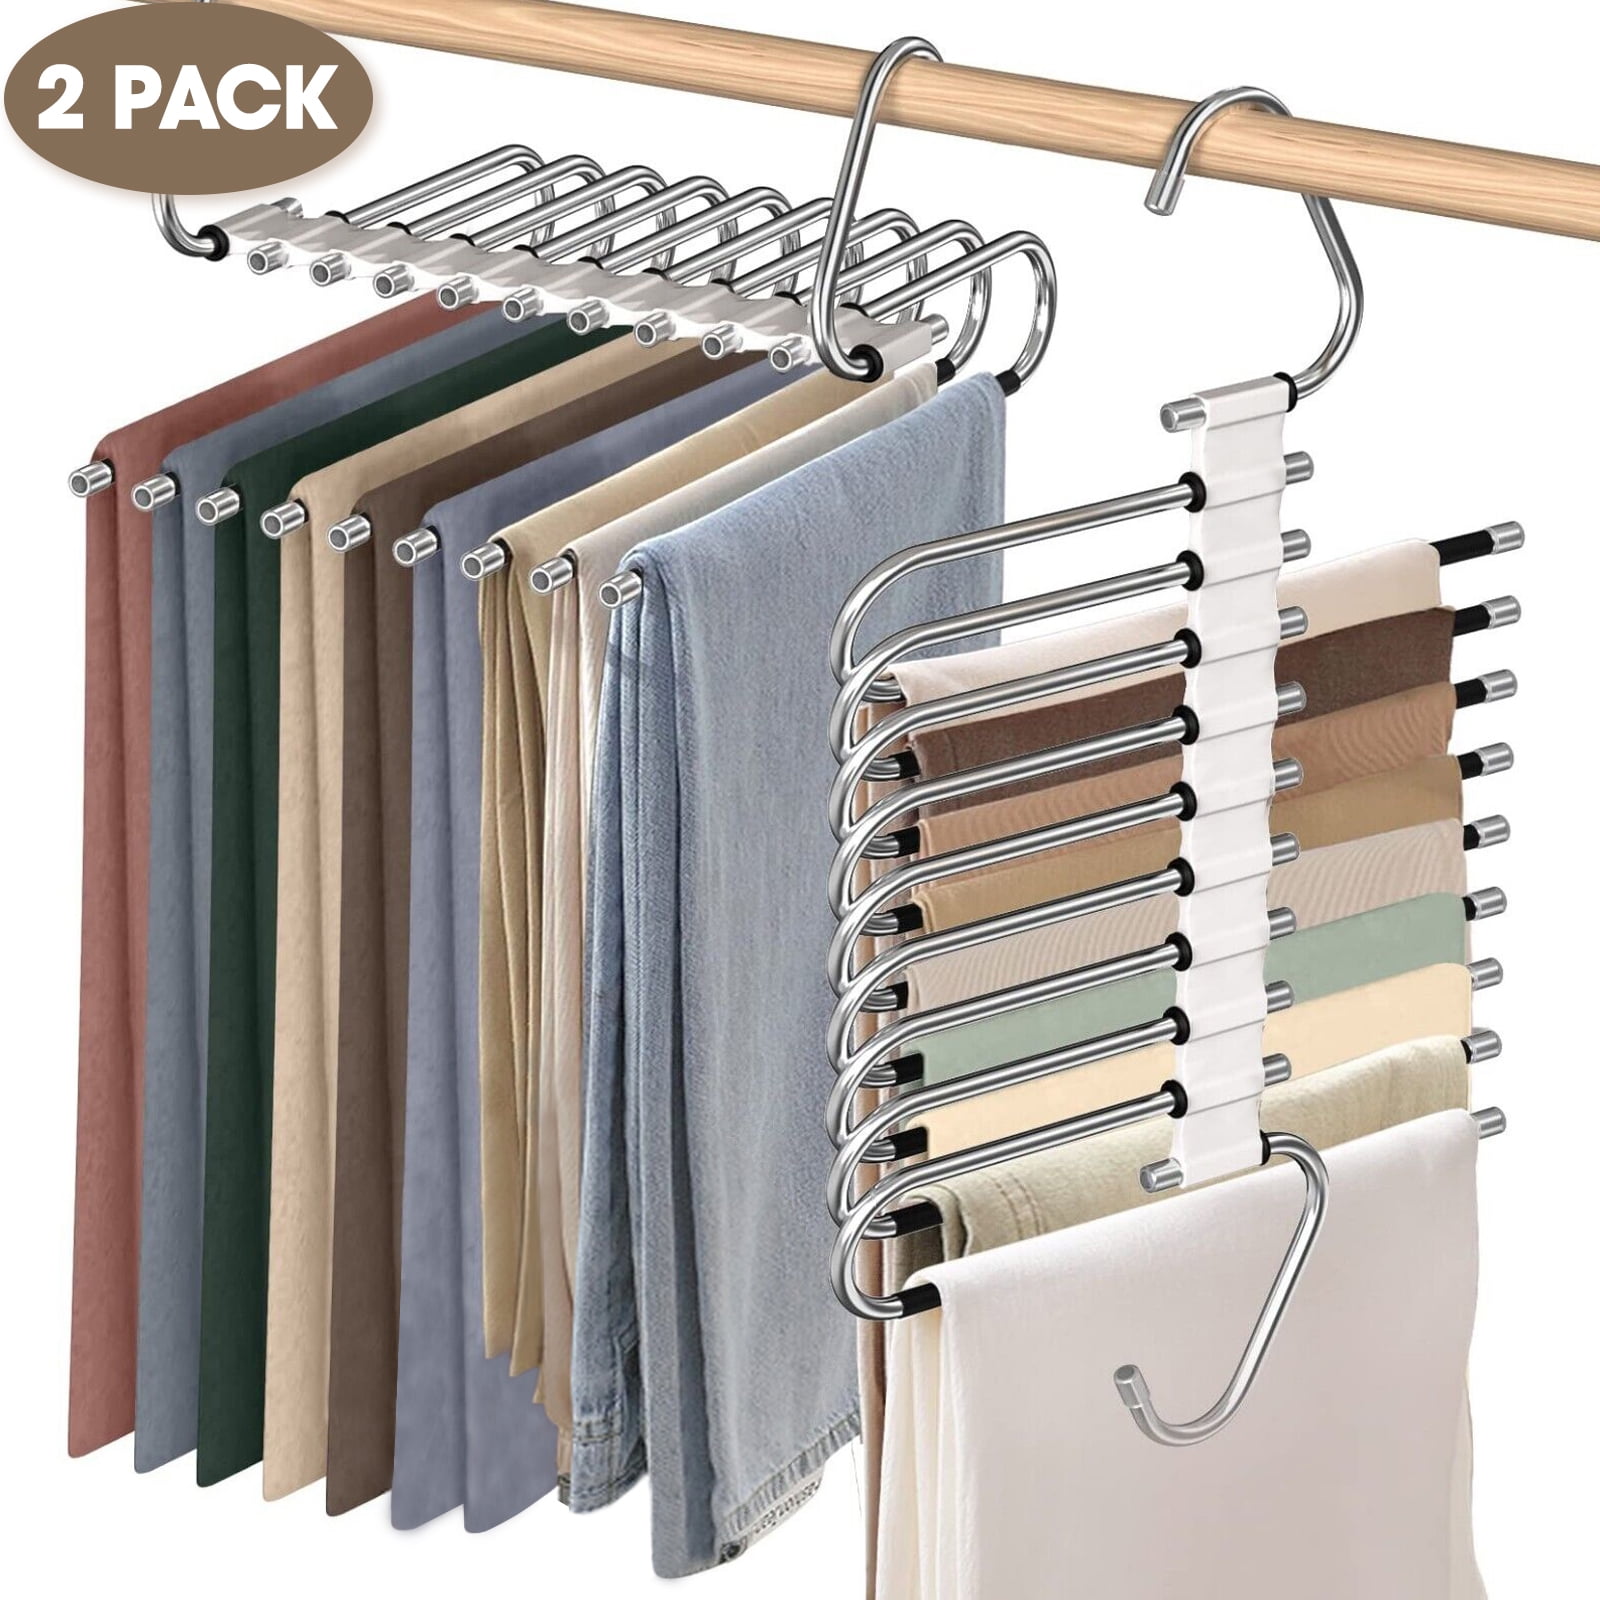 Topekada 30 Pack Pants Hangers Space Saving, 9-11 inch Non Slip Stainless Steel Metal Pants Hanger with Clips, Clothes Hangers for Shorts, Skirt